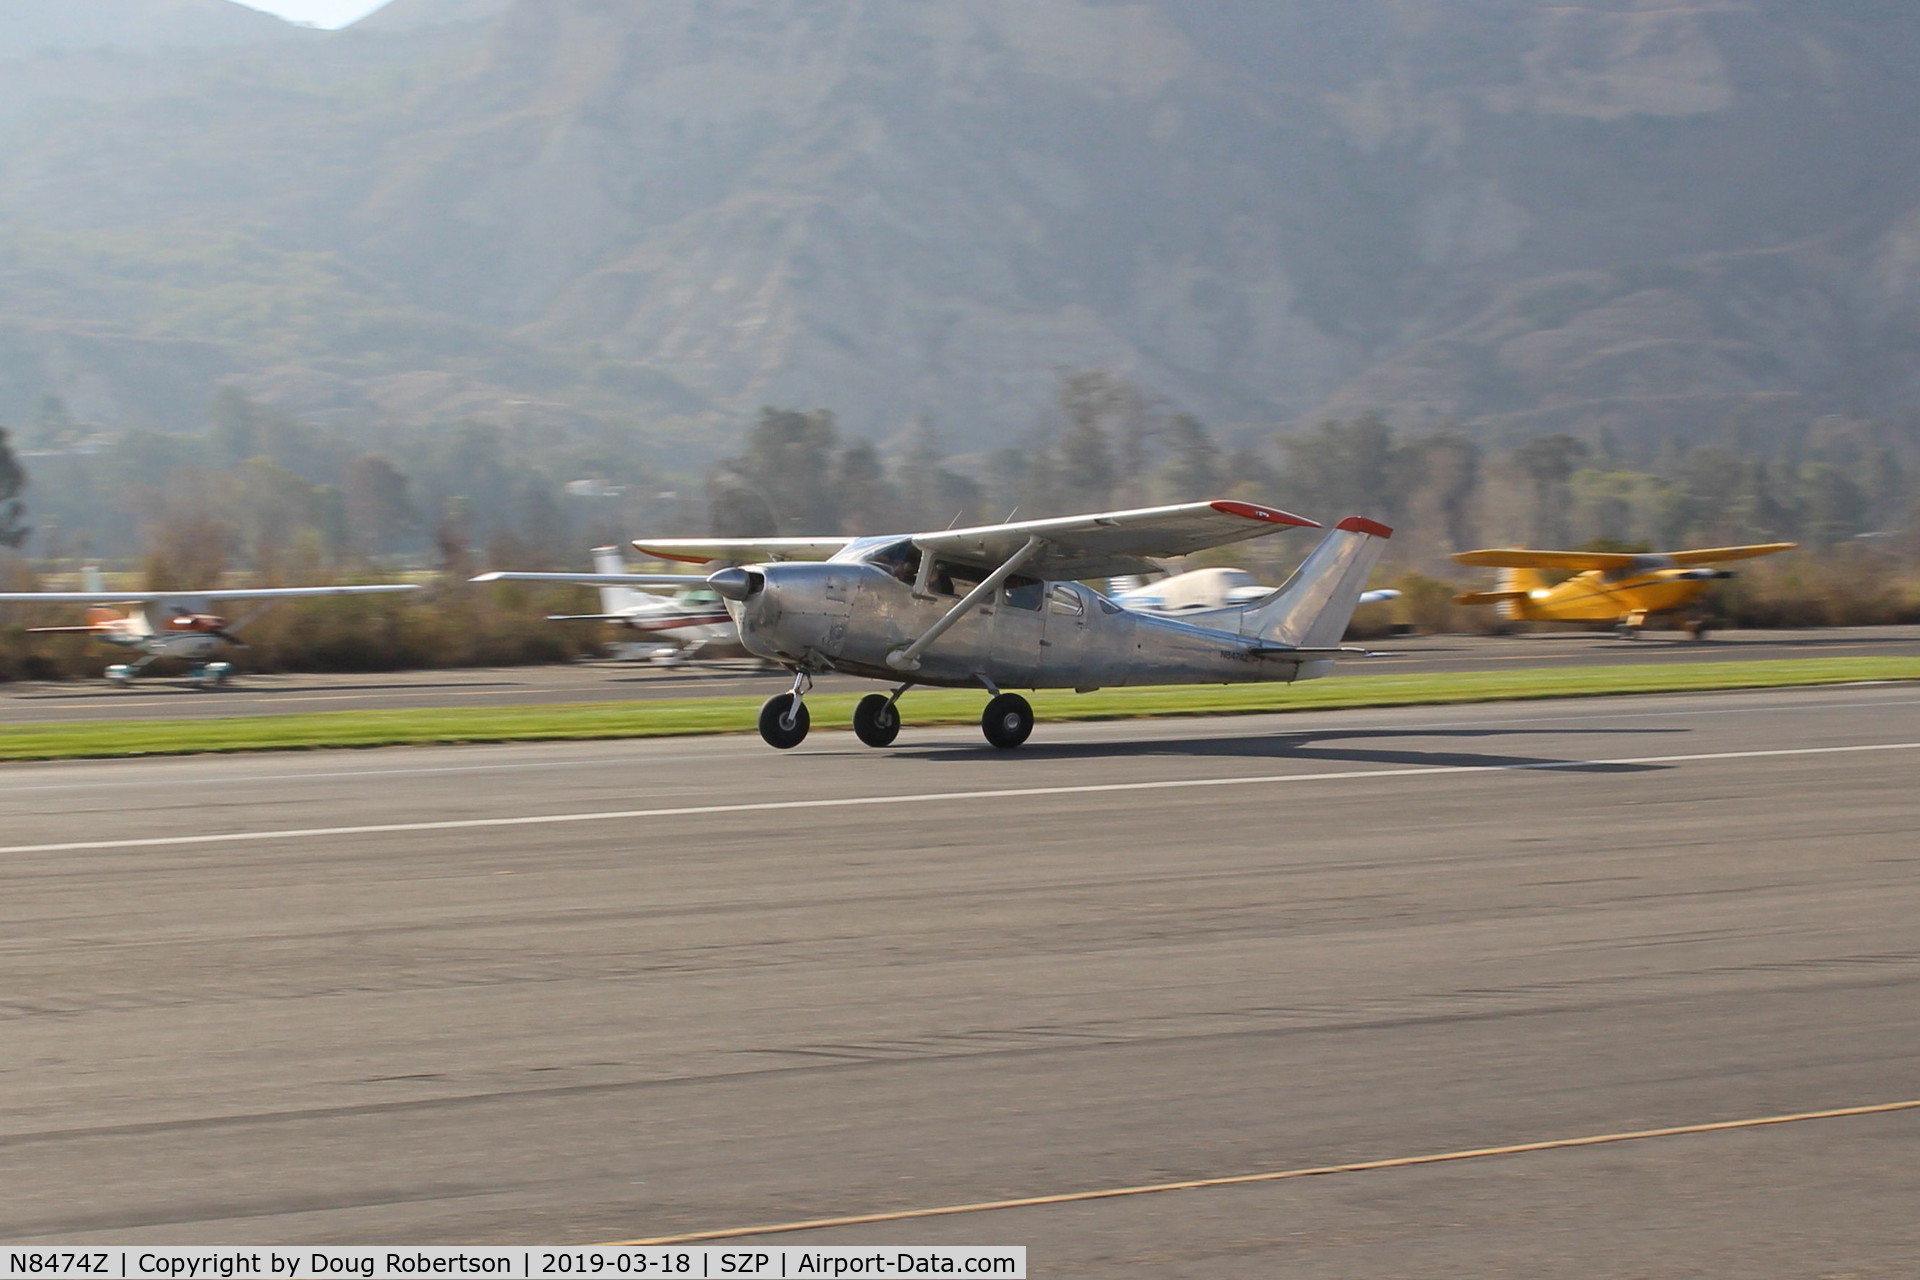 N8474Z, 1963 Cessna 210-5 C/N 205-0474, 1963 Cessna 210-5 (205) UTILINE, Continental IO-470-E 260 Hp, fixed gear version of 210-C, on runway 04. Advantages: more interior room and cheaper insurance.